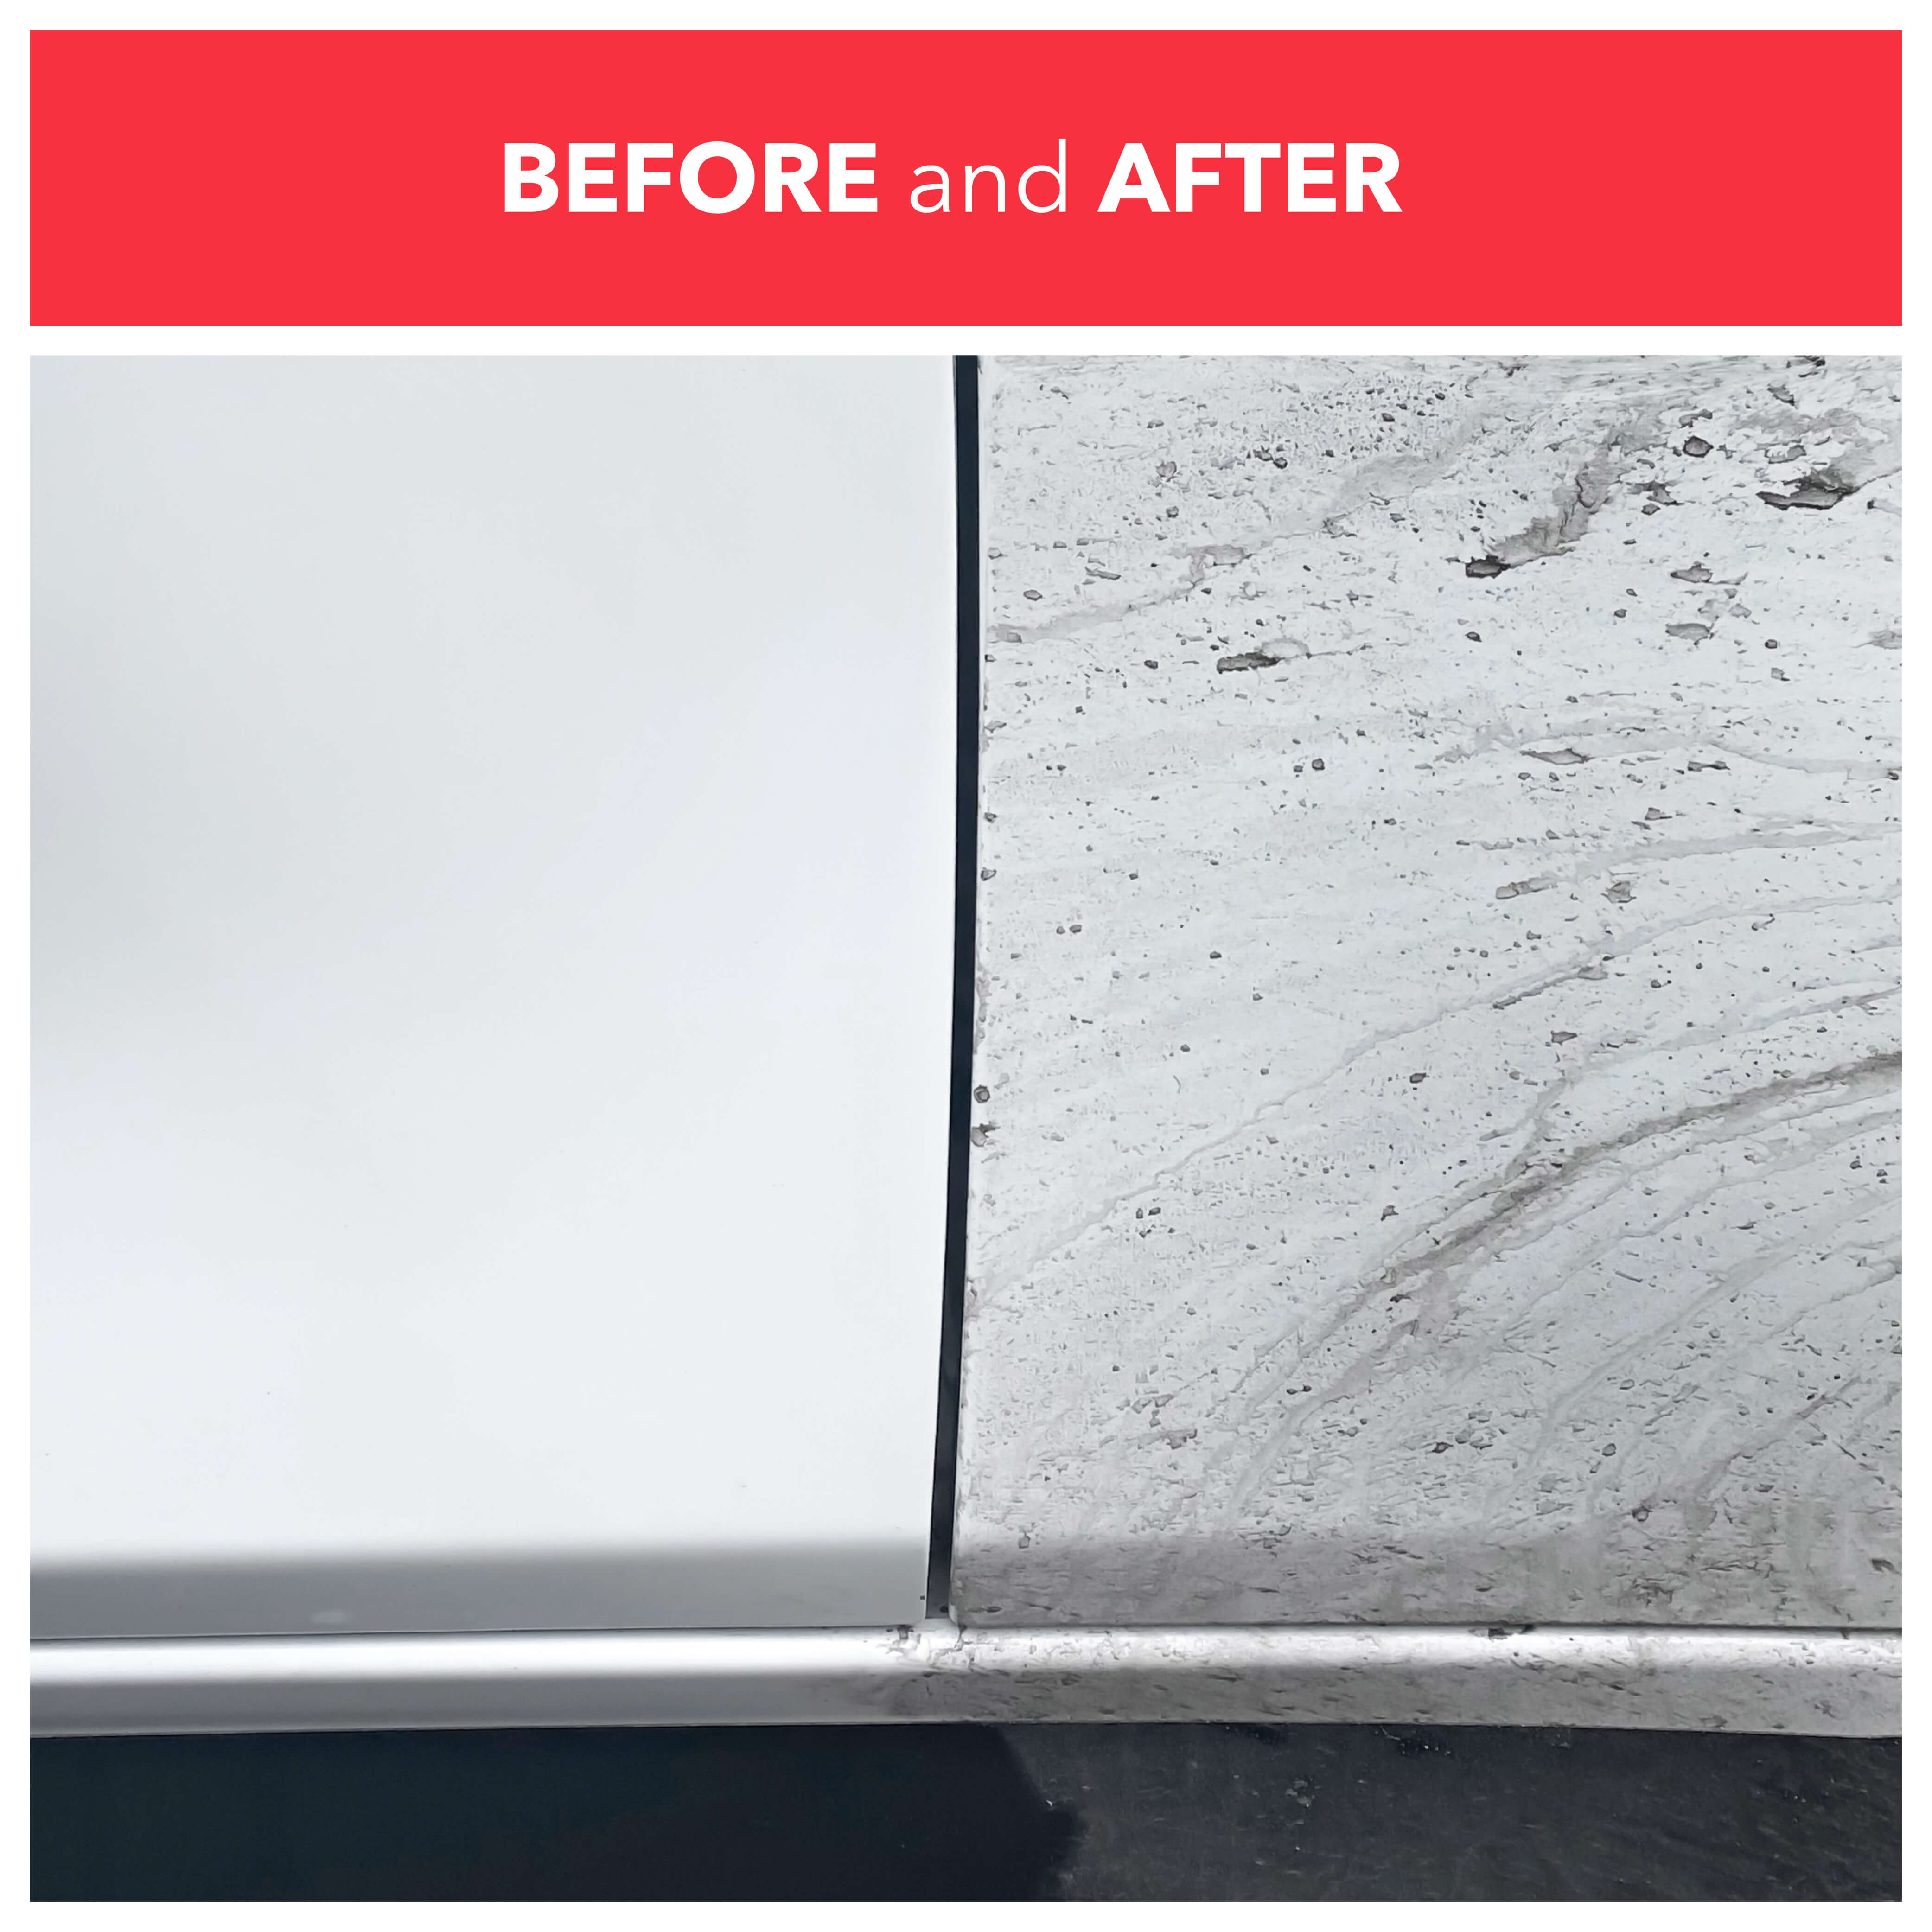 Before and after using waterless wash & wax